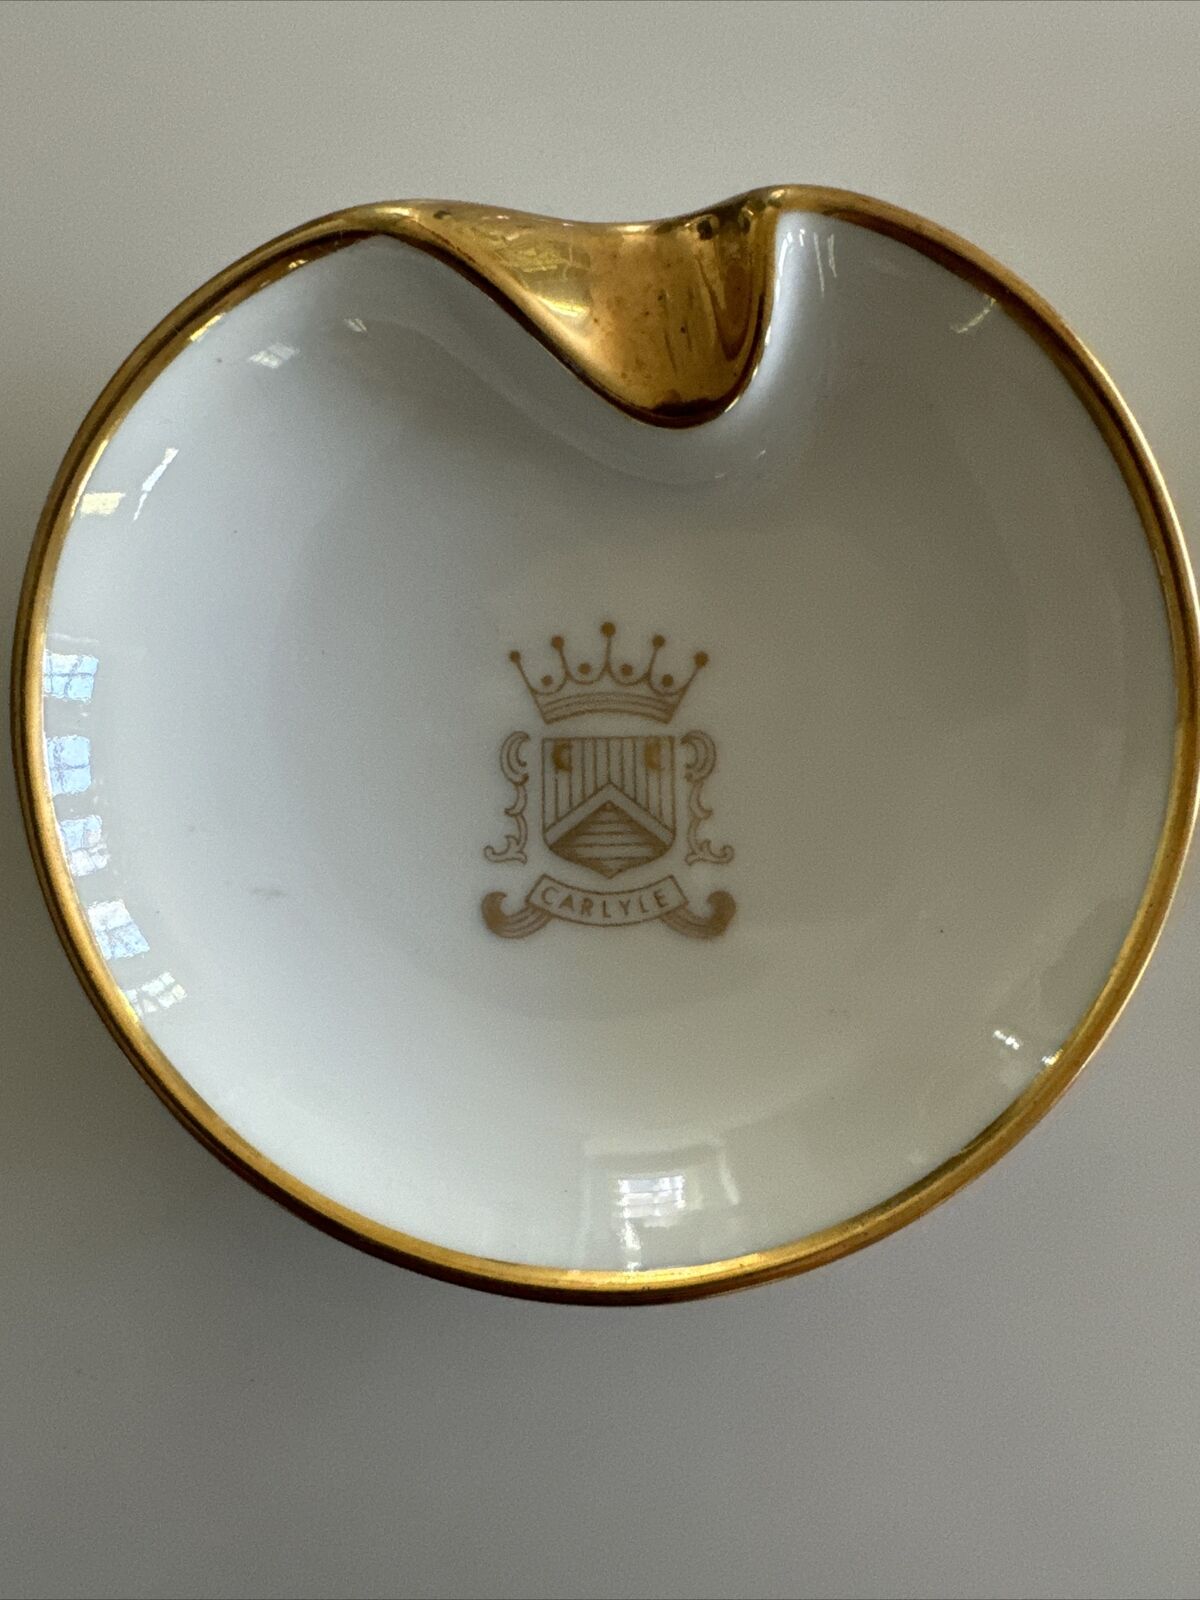 Vintage Carlyle Hotel New York white and gold ashtray